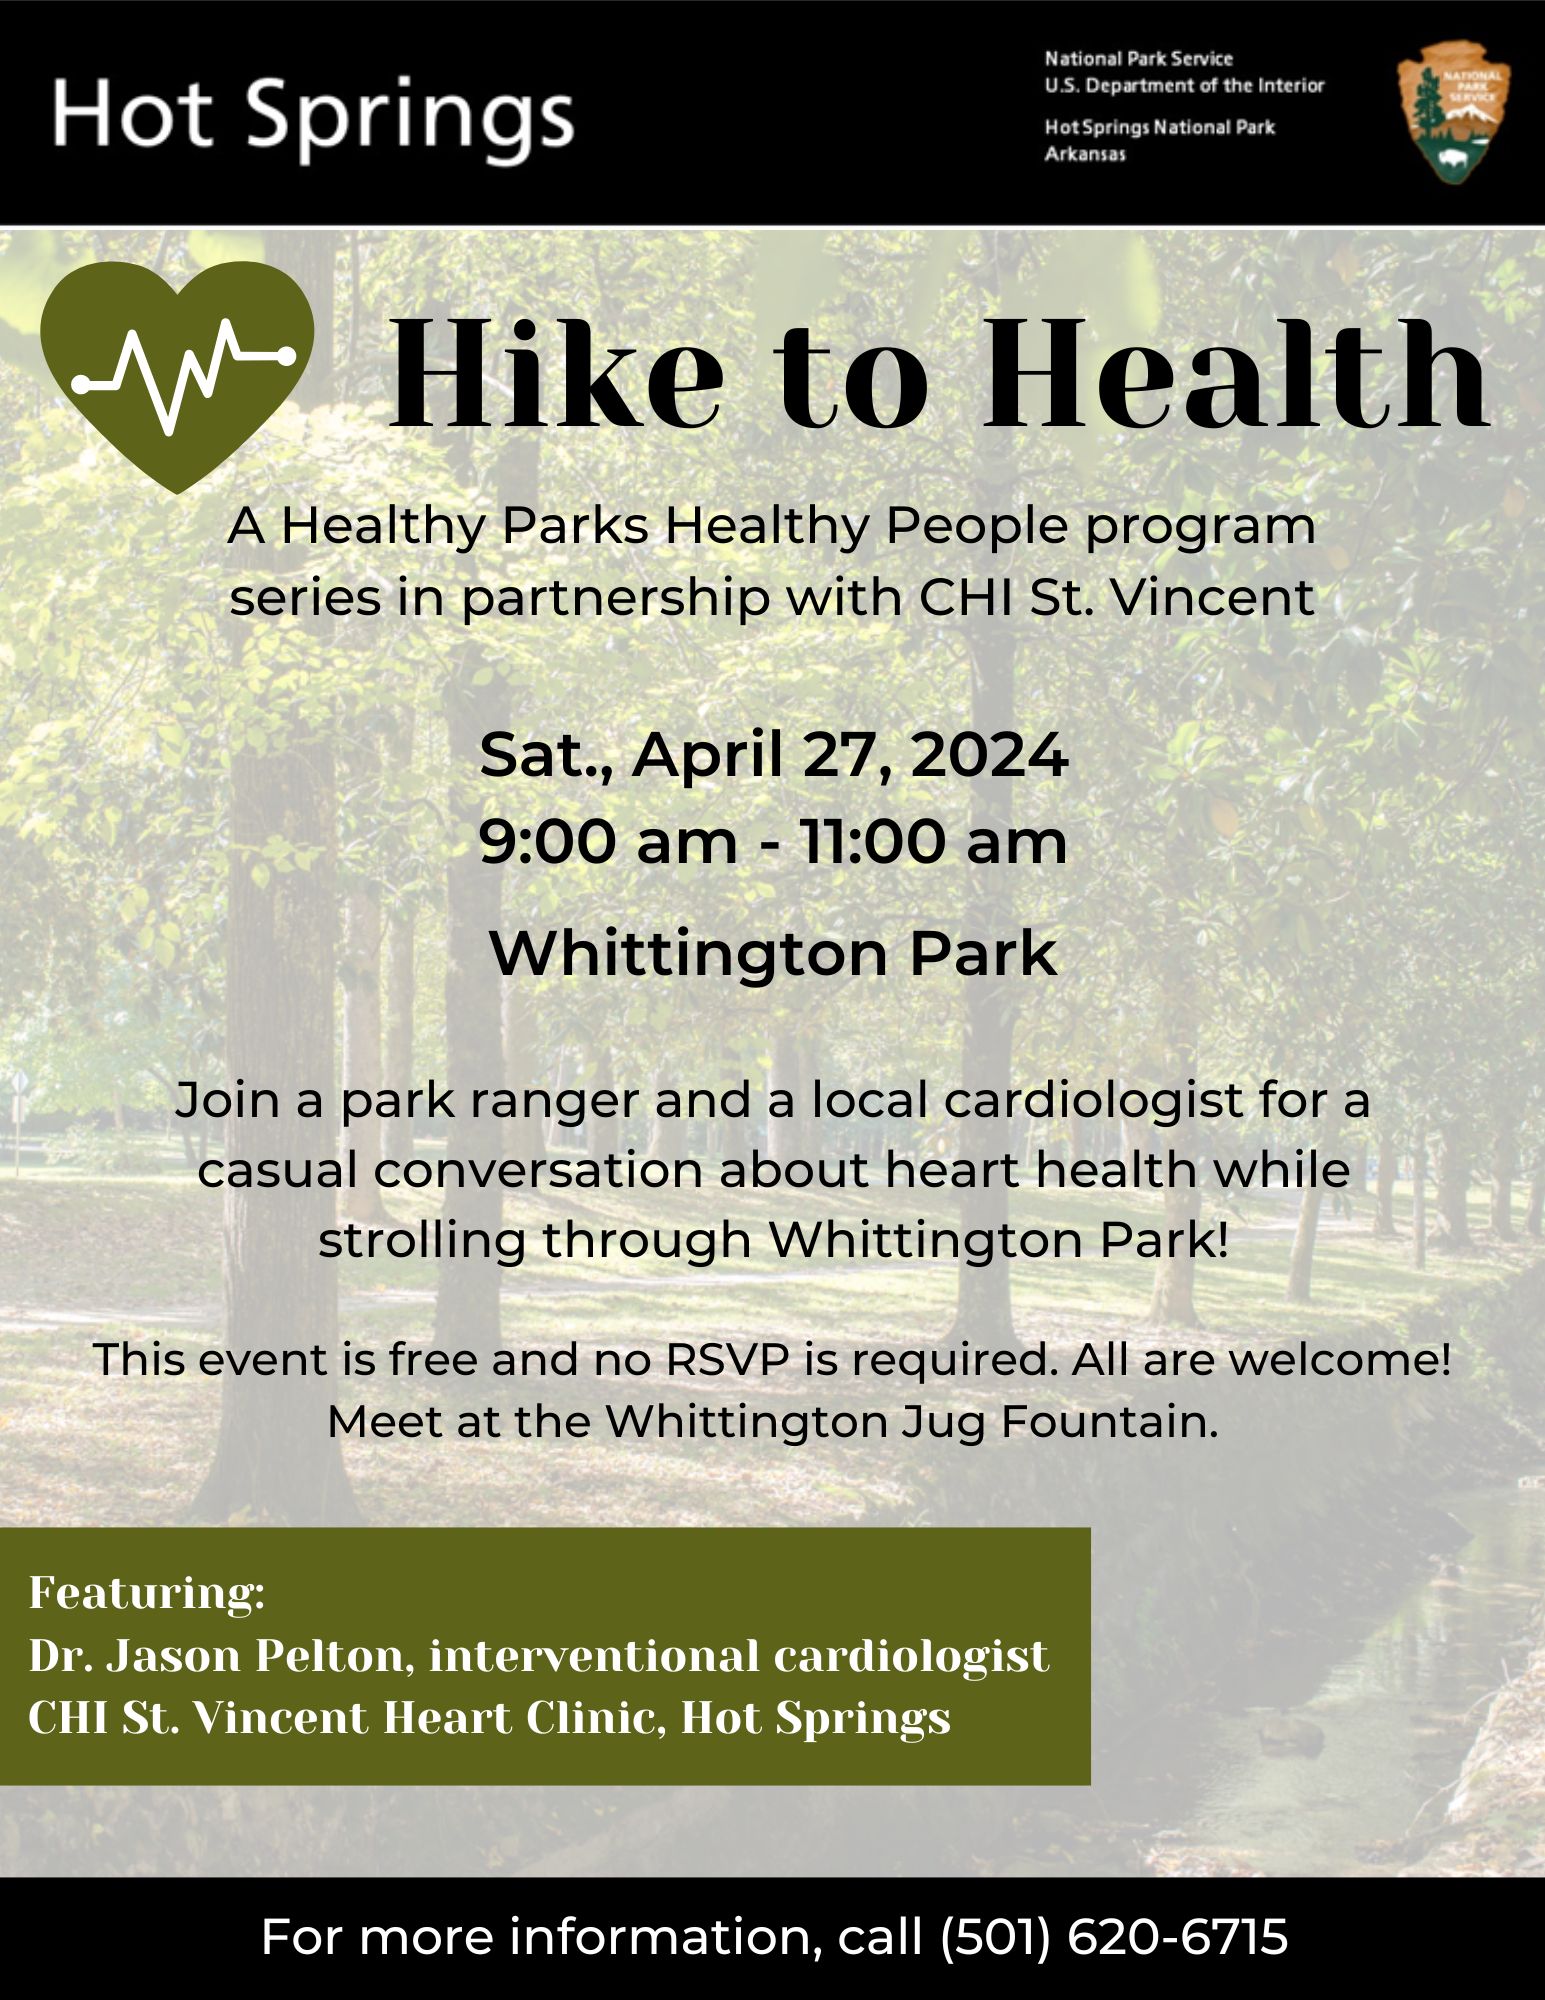 Green, nature-feeling flyer with the words, "Hike to Health: A healthy parks healhty people program series in partnership with CHI St. Vincent. Sat., April 27, 2025 9:00am - 11:00am Whittington Park."